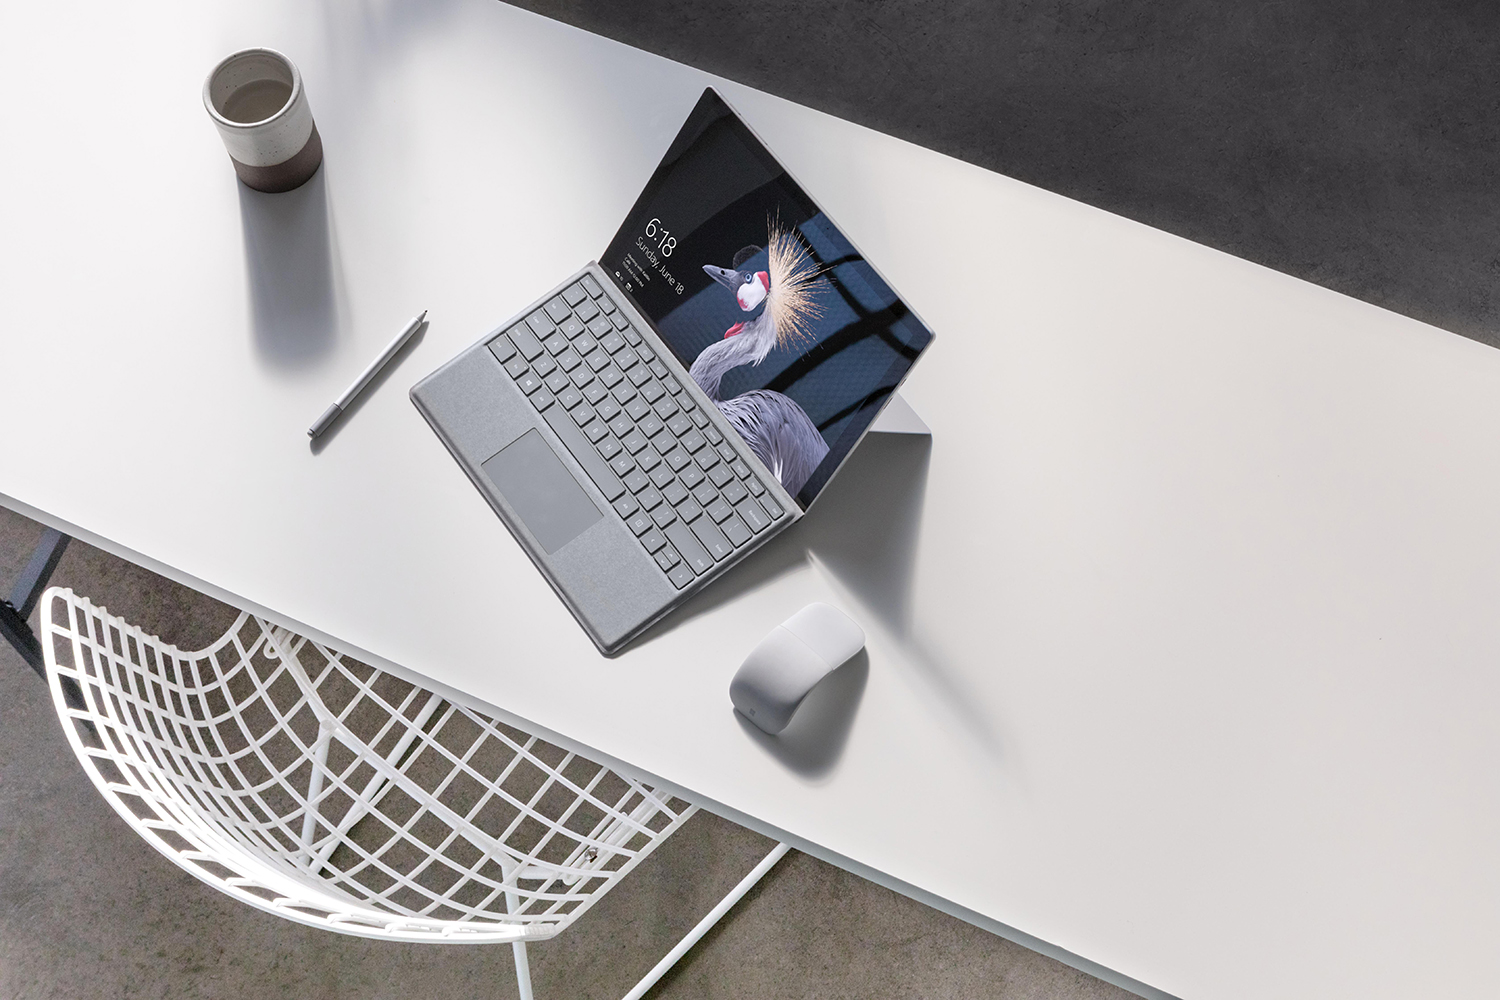 microsoft surface trade in for mac